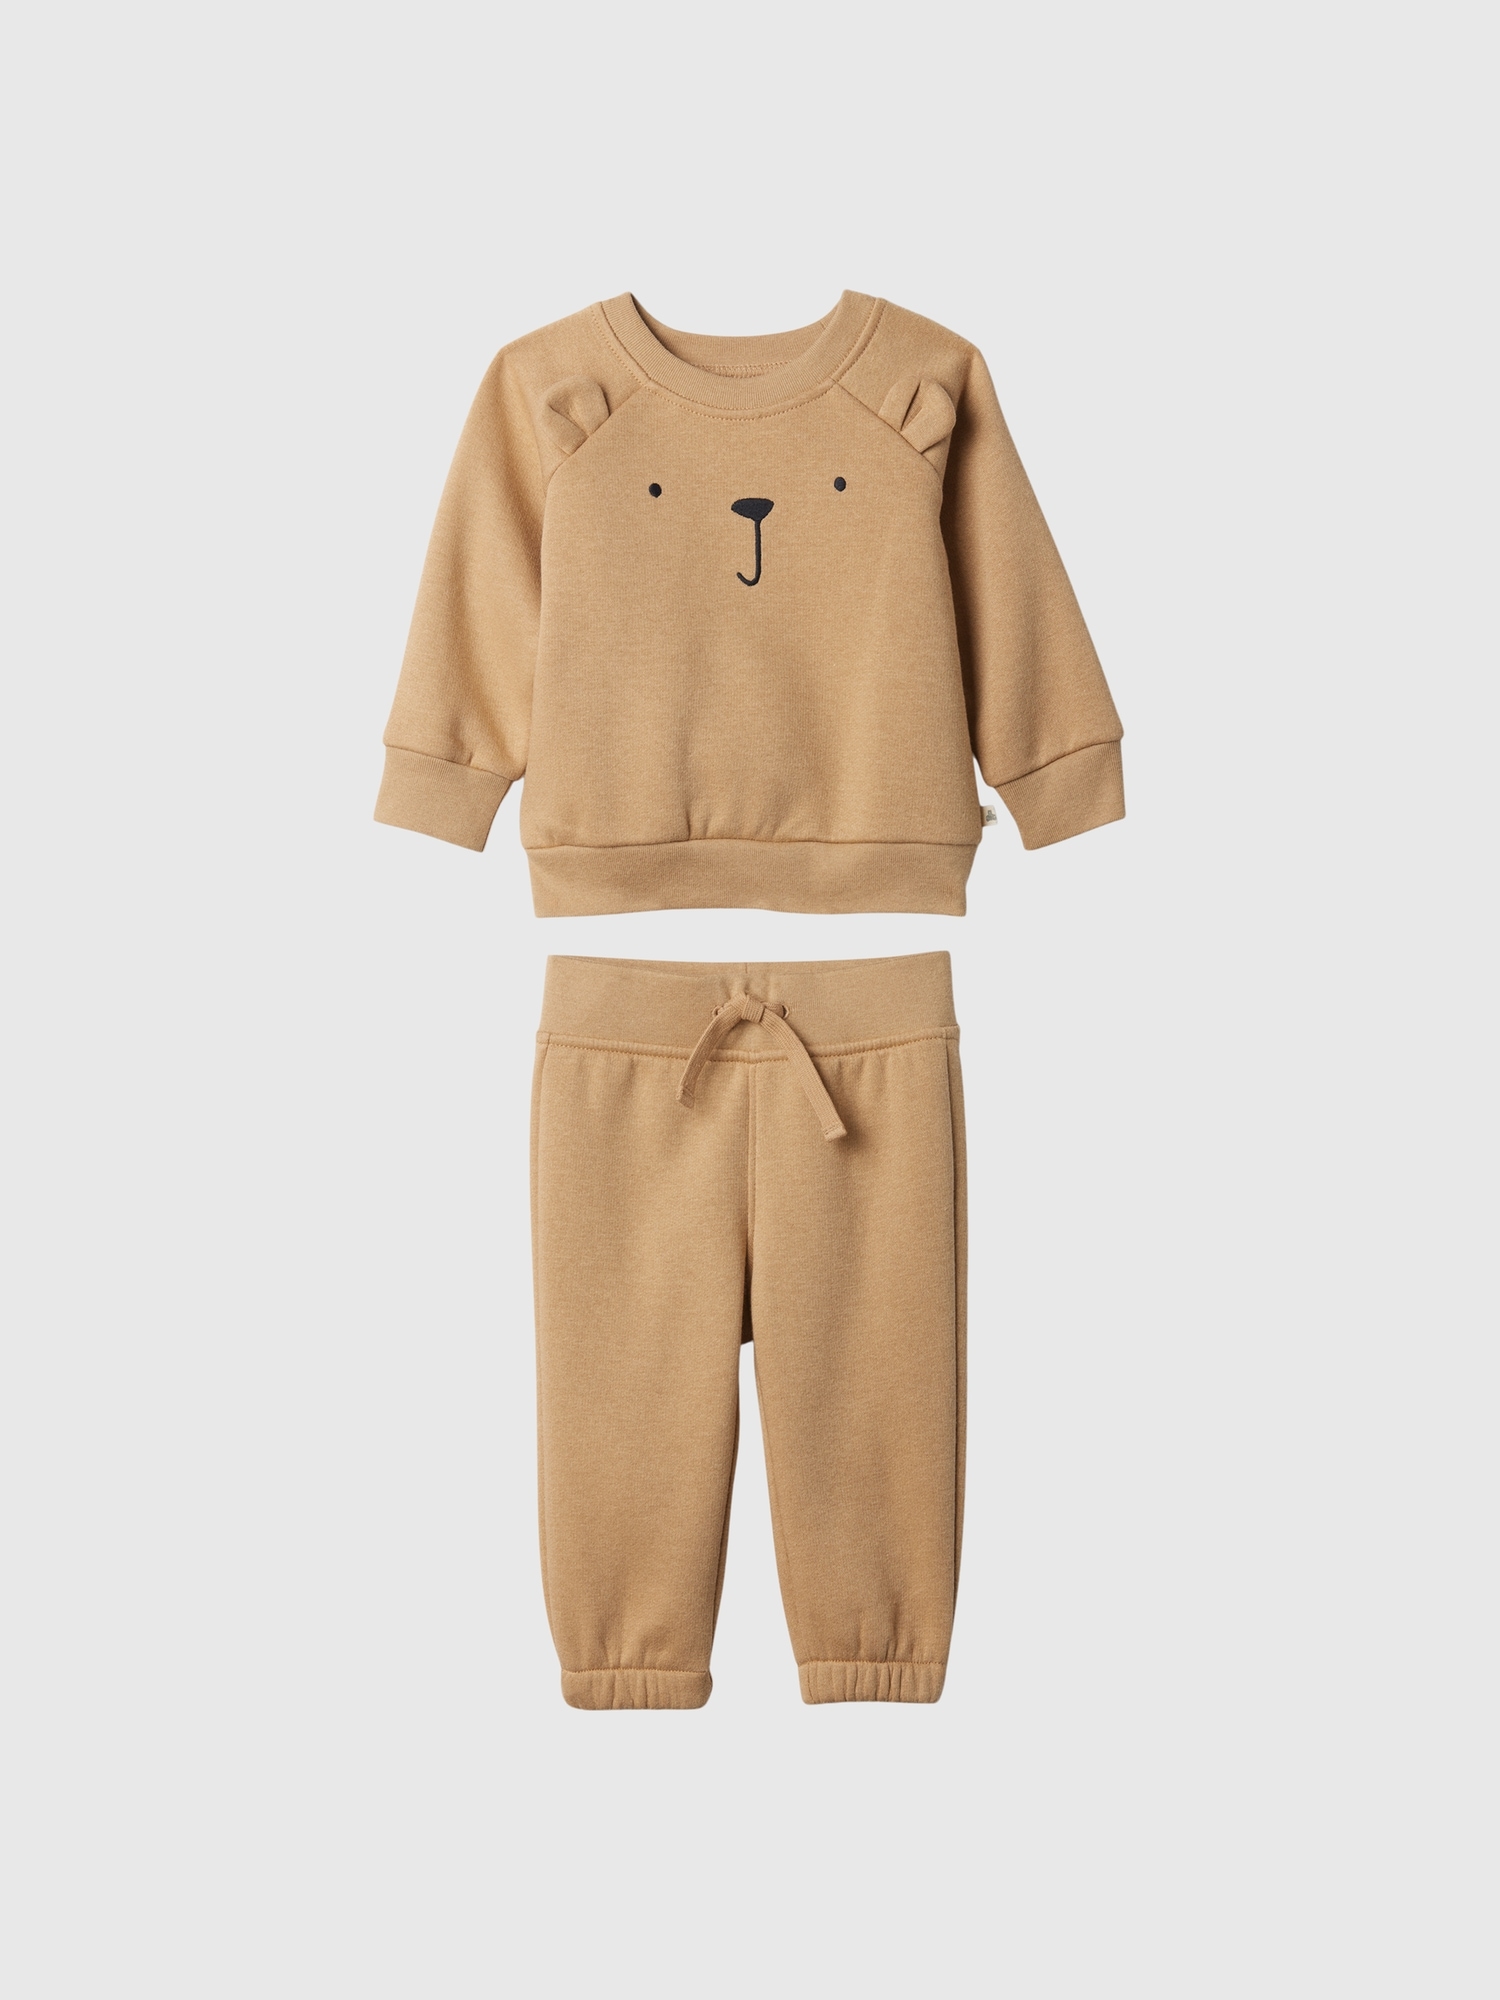 Baby Brannan Bear Two-Piece Outfit Set